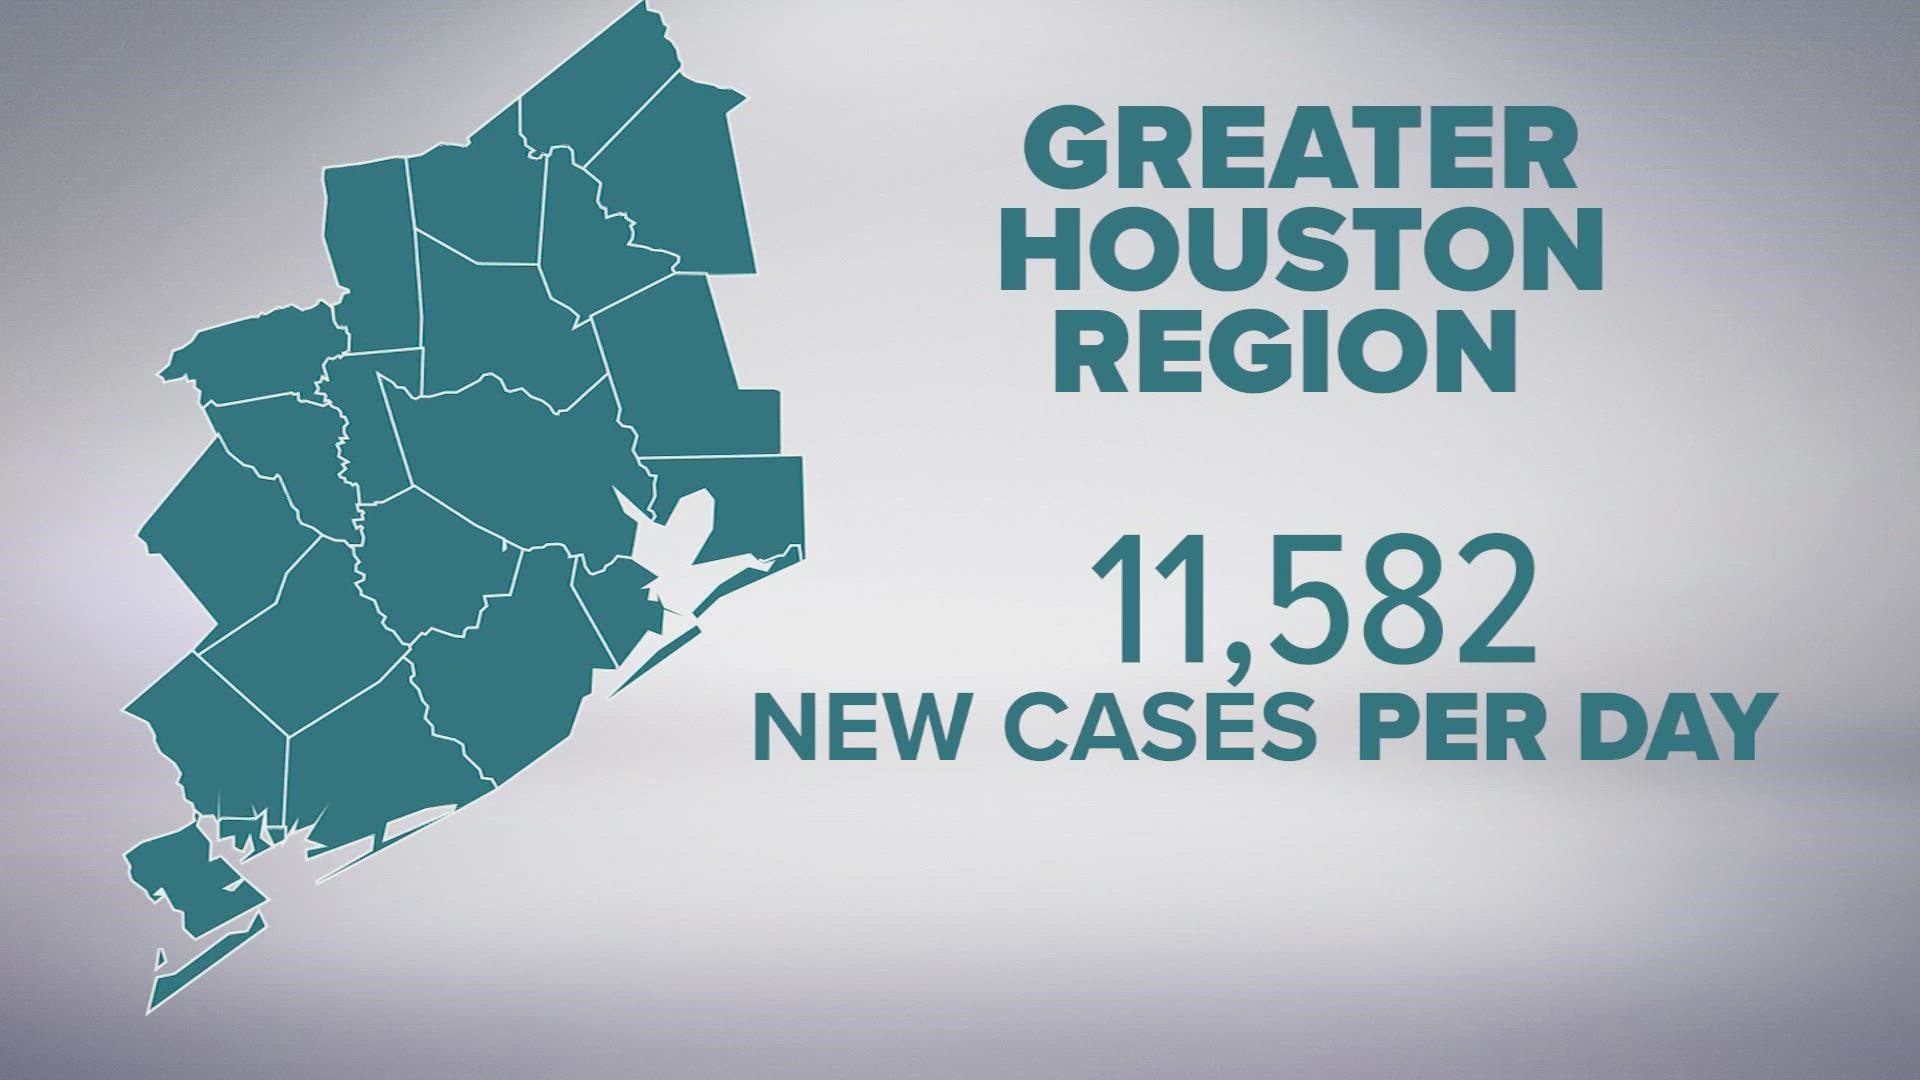 In the 20 counties that make up the greater Houston region, an average of 11,582 people are testing positive each day.